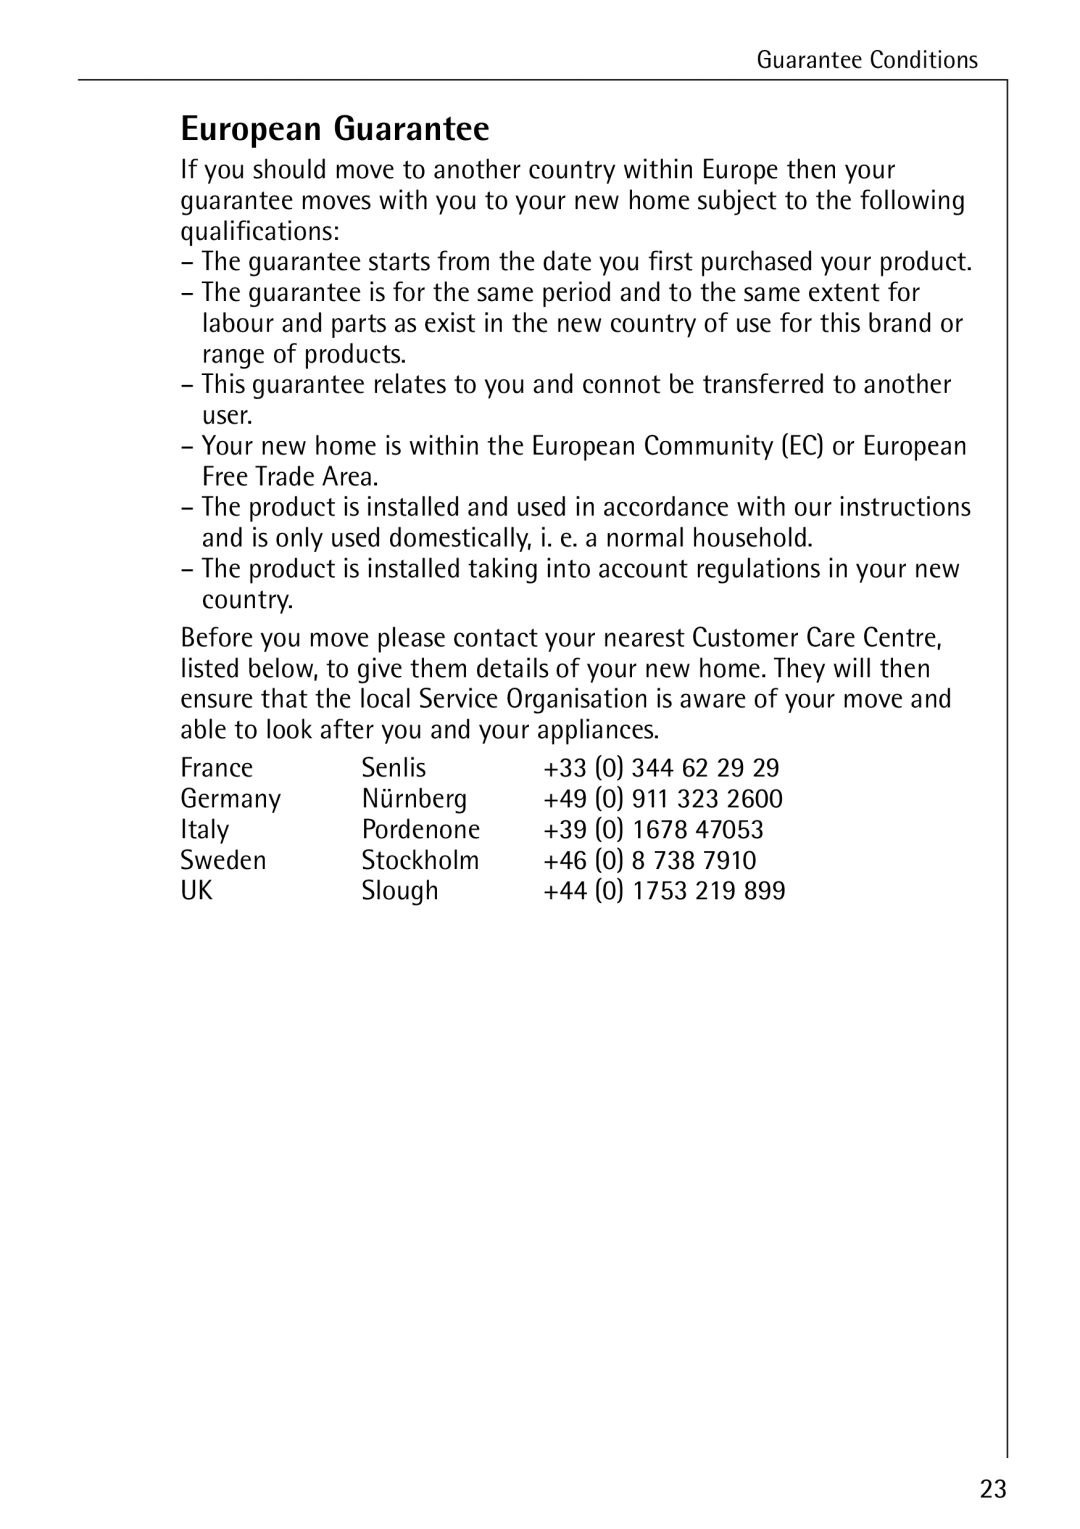 Electrolux Integrated operating instructions European Guarantee 